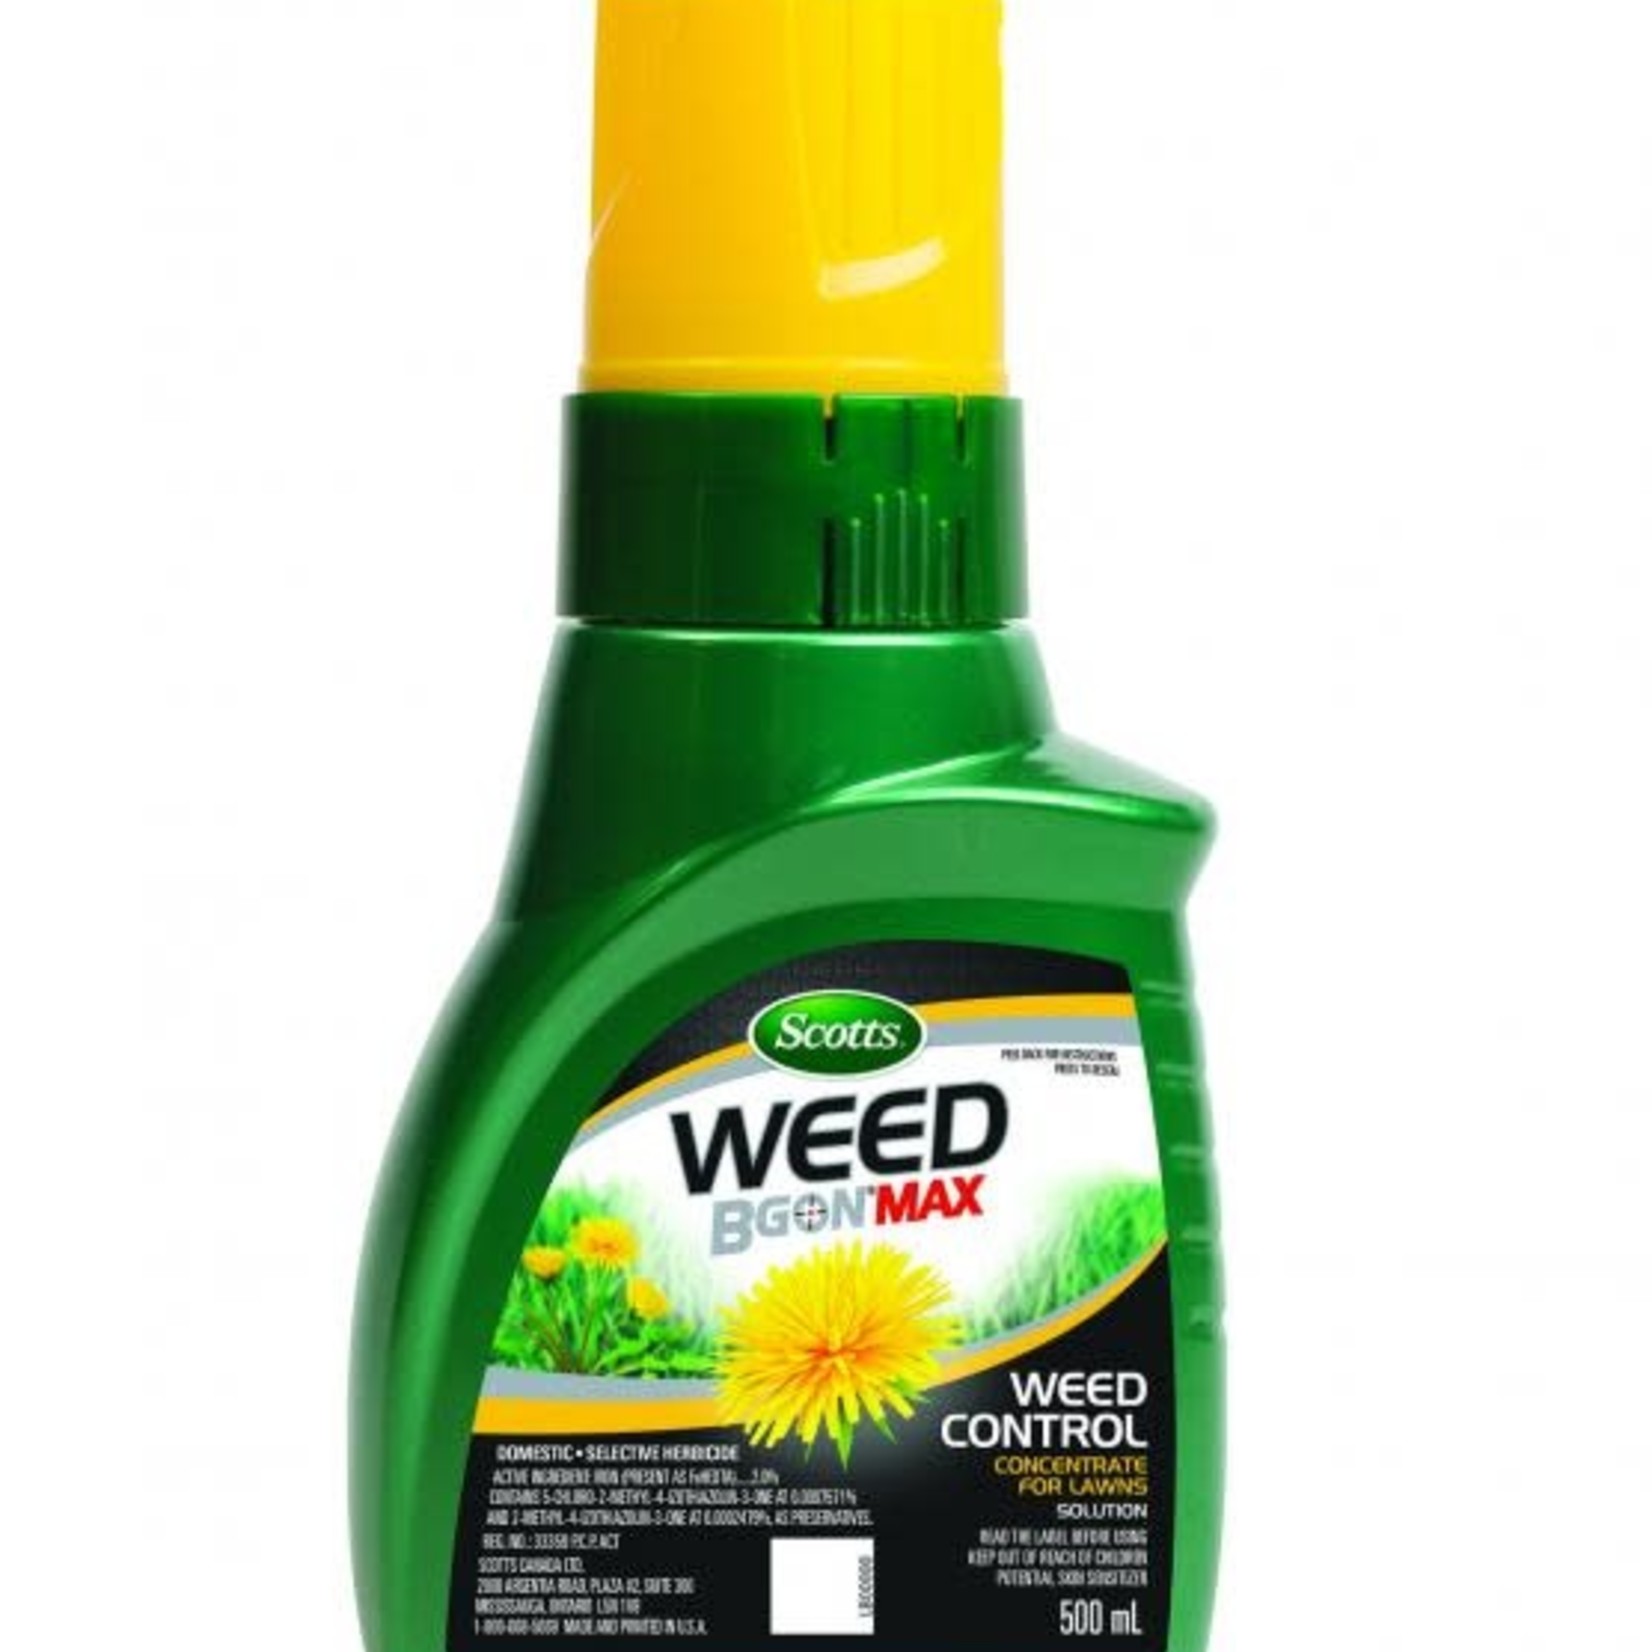 Scotts Scotts Weed B Gon Max Weed Control Concentrate for Lawns - 1L